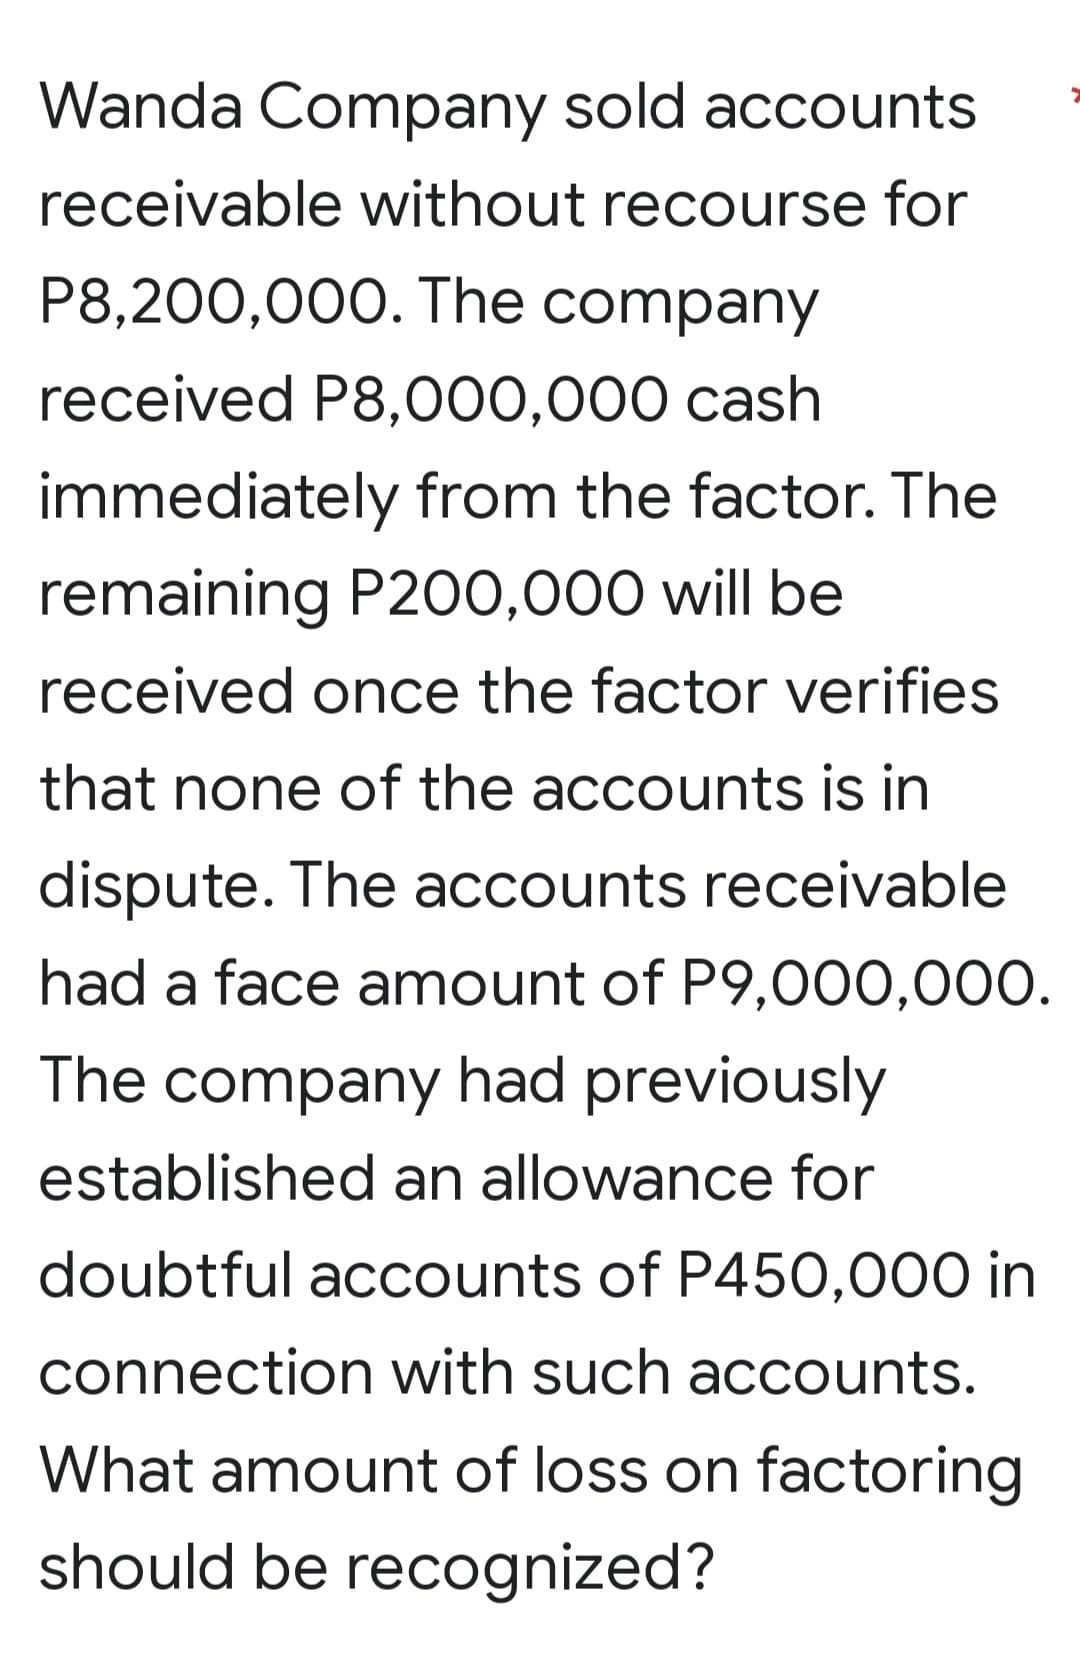 Wanda Company sold accounts
receivable without recourse for
P8,200,000. The company
received P8,000,000 cash
immediately from the factor. The
remaining P200,000 will be
received once the factor verifies
that none of the accounts is in
dispute. The accounts receivable
had a face amount of P9,000,000.
The company had previously
established an allowance for
doubtful accounts of P450,000 in
connection with such accounts.
What amount of loss on factoring
should be recognized?